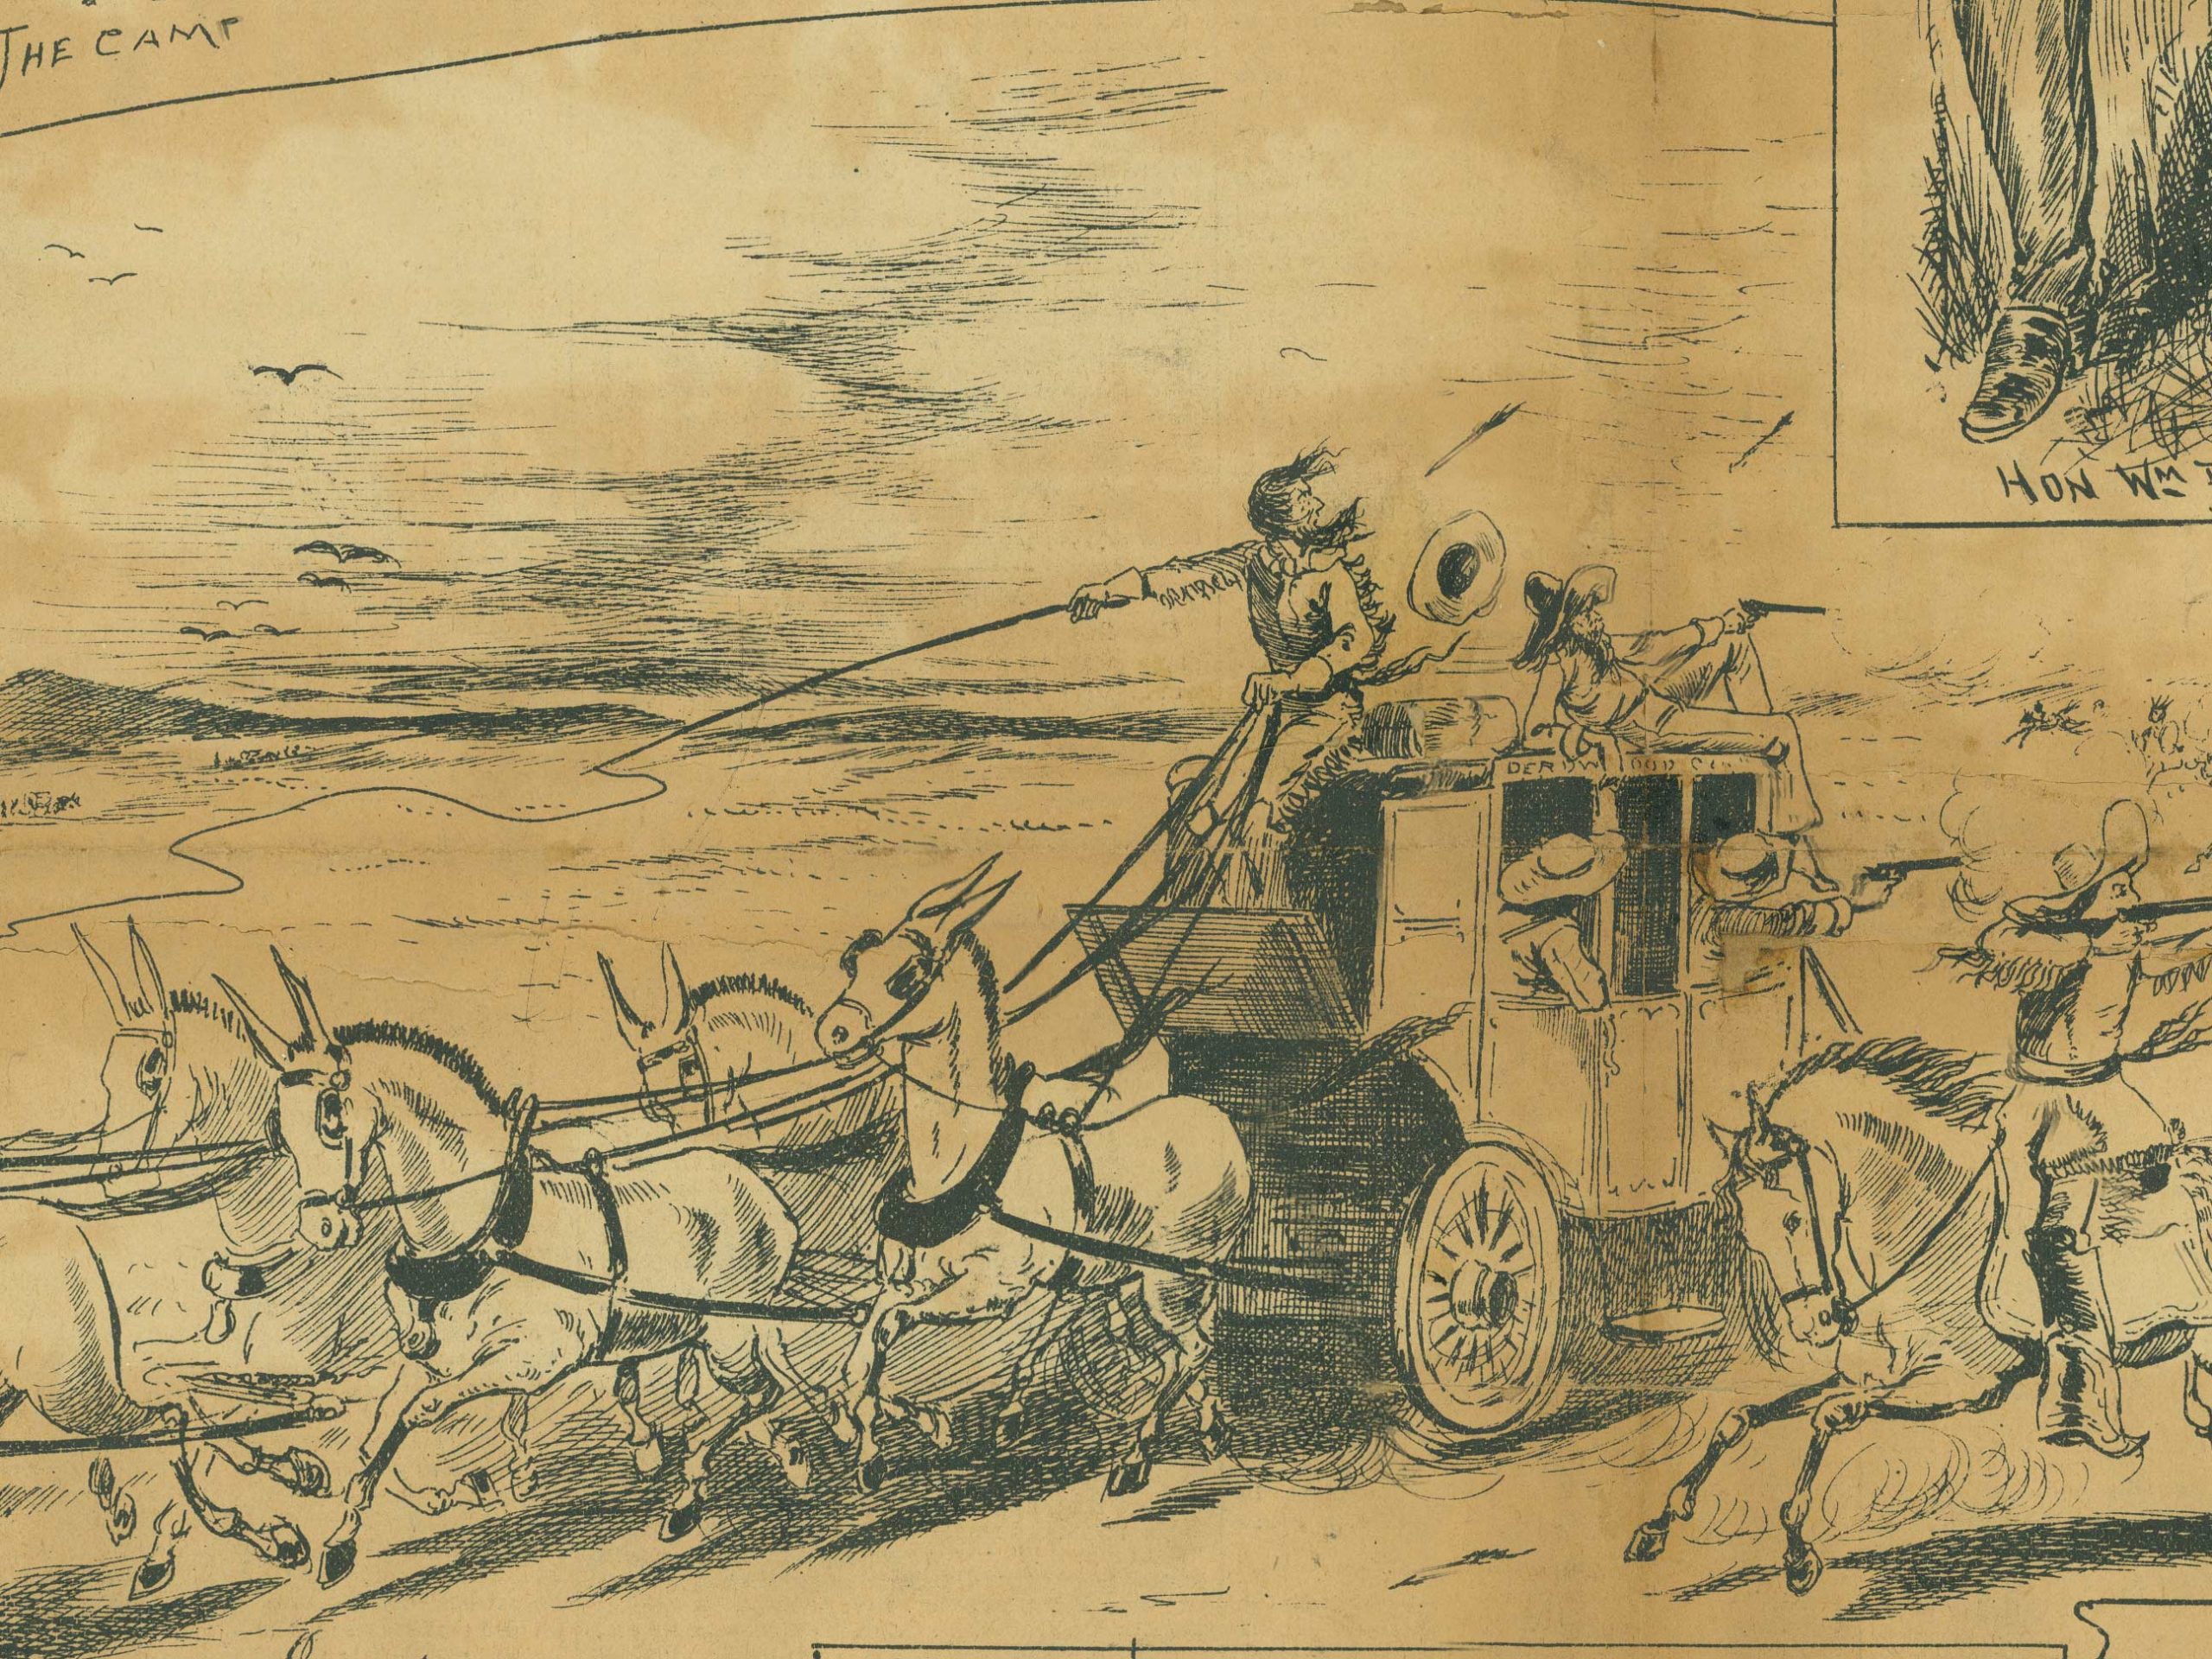 A close up of a poster sketched, two men on a horse drawn carriage facing behind them with pistols. Another man with a pistol rides along side on a horse.